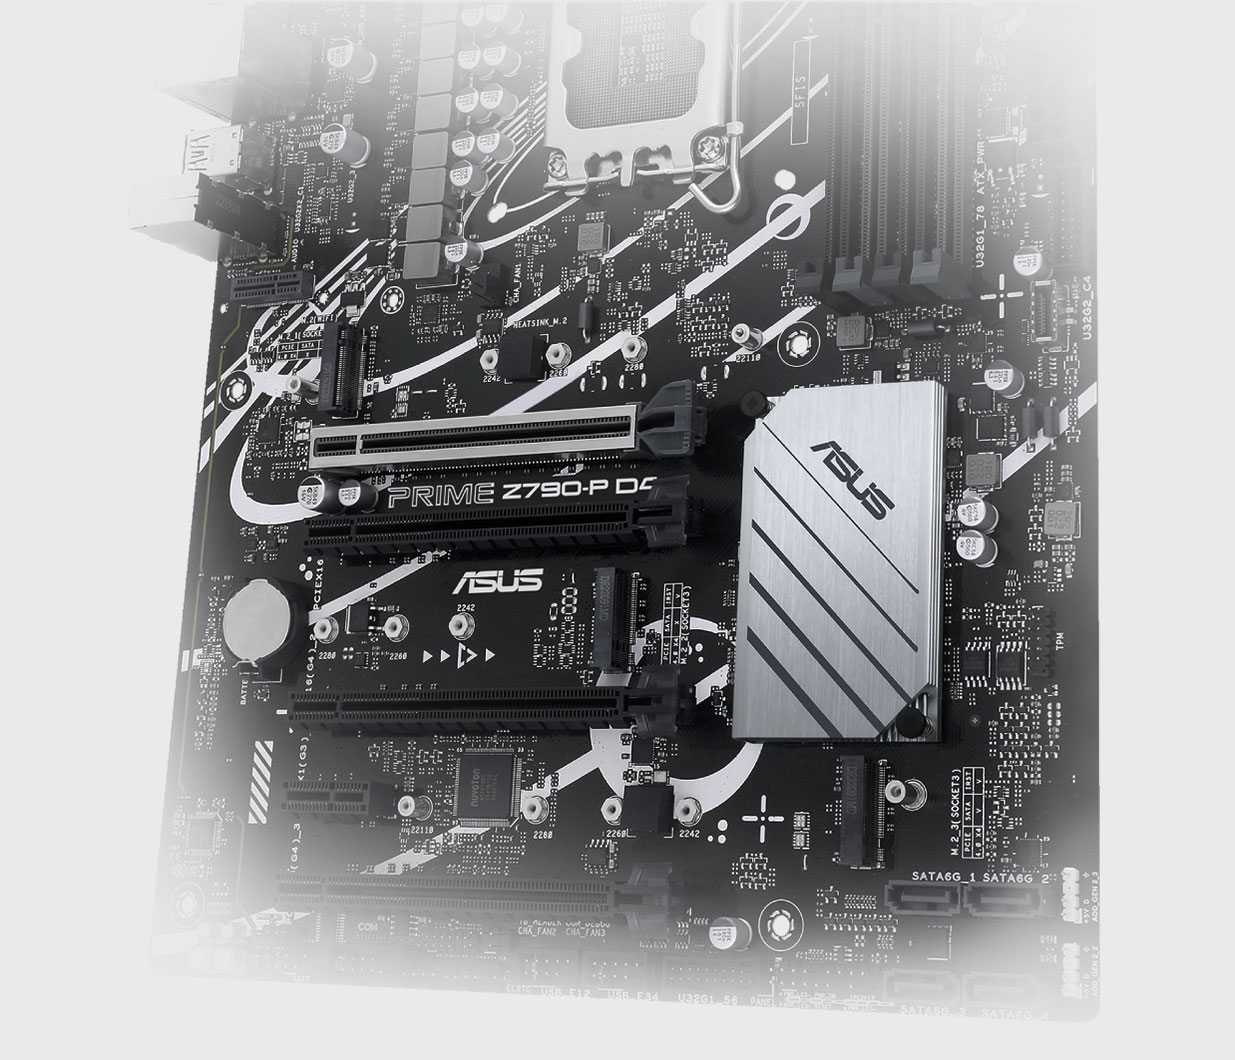 The PRIME Z790-P D4-CSM motherboard supports three M.2 slots.